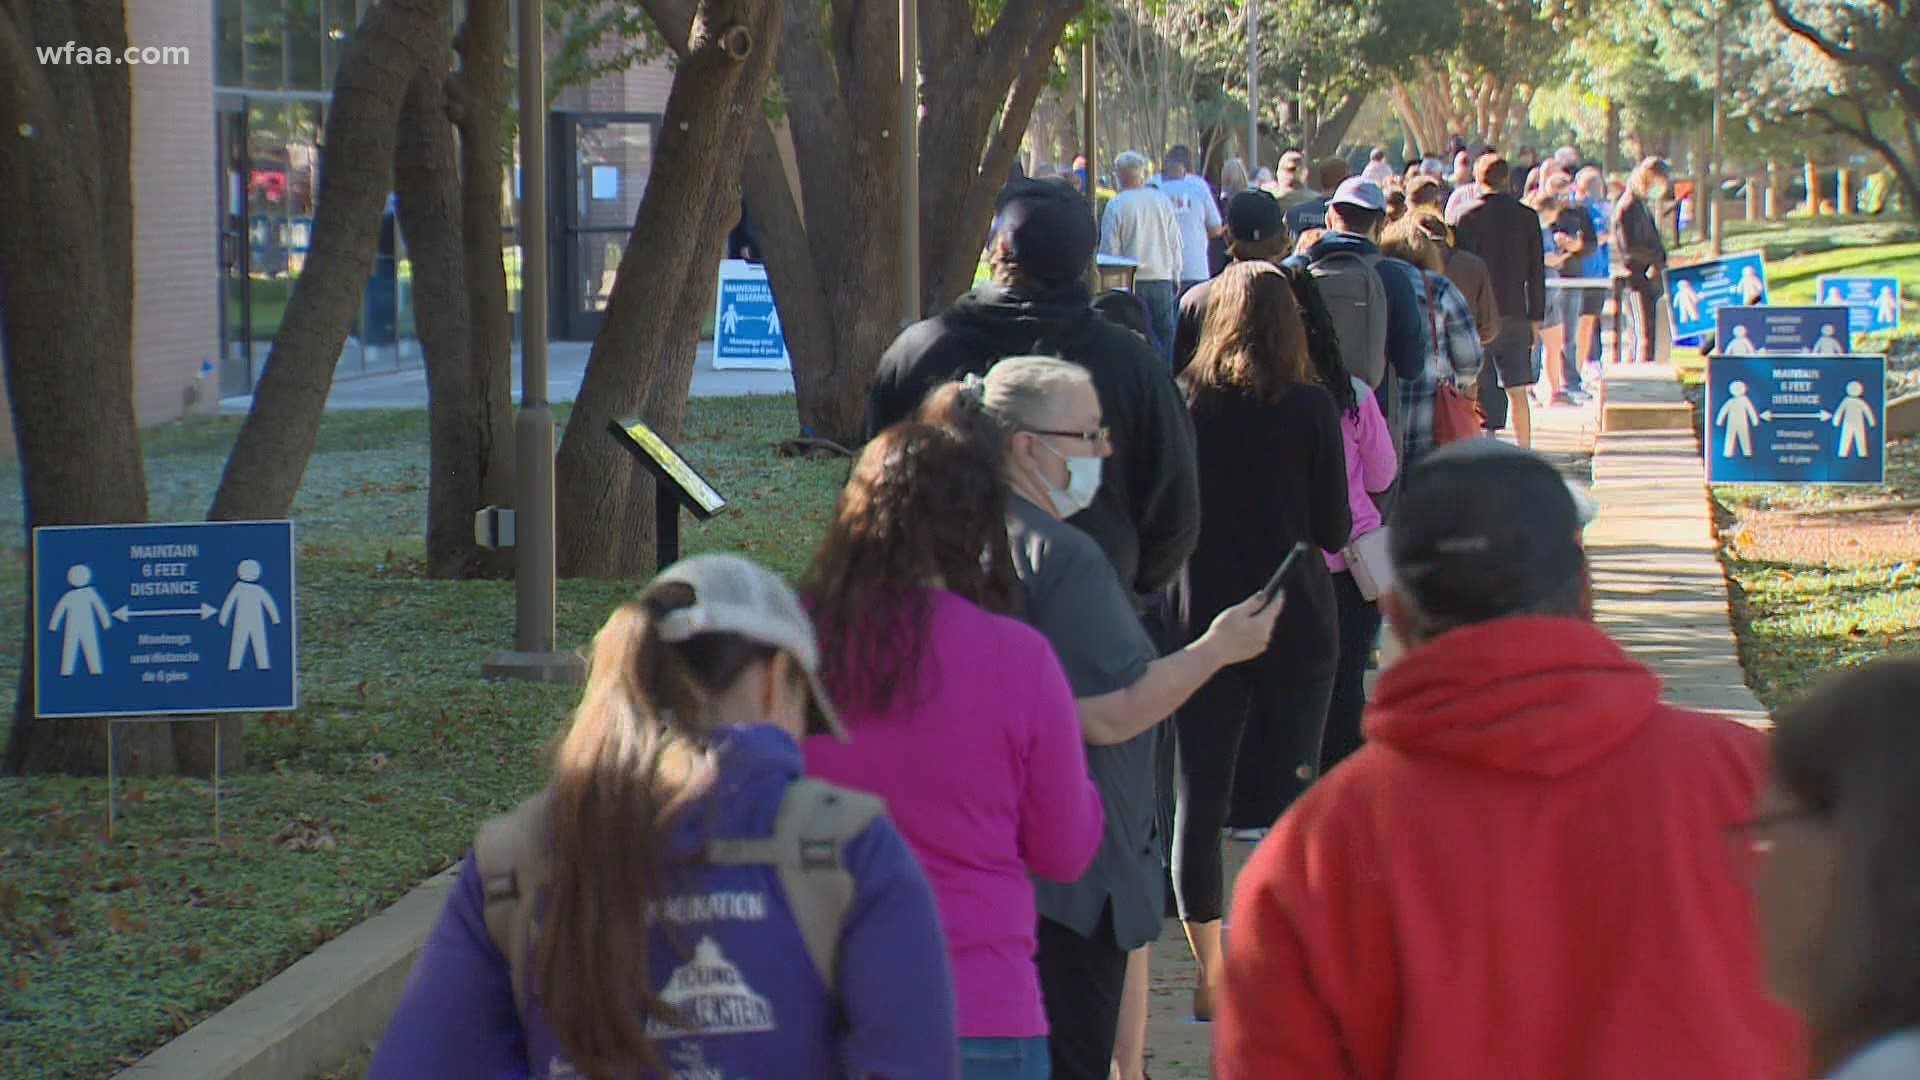 The long lines of voters, from Richardson to Fort Worth, on the last day of early voting served as a continuing illustration of the Lone Star state swiftly setting a